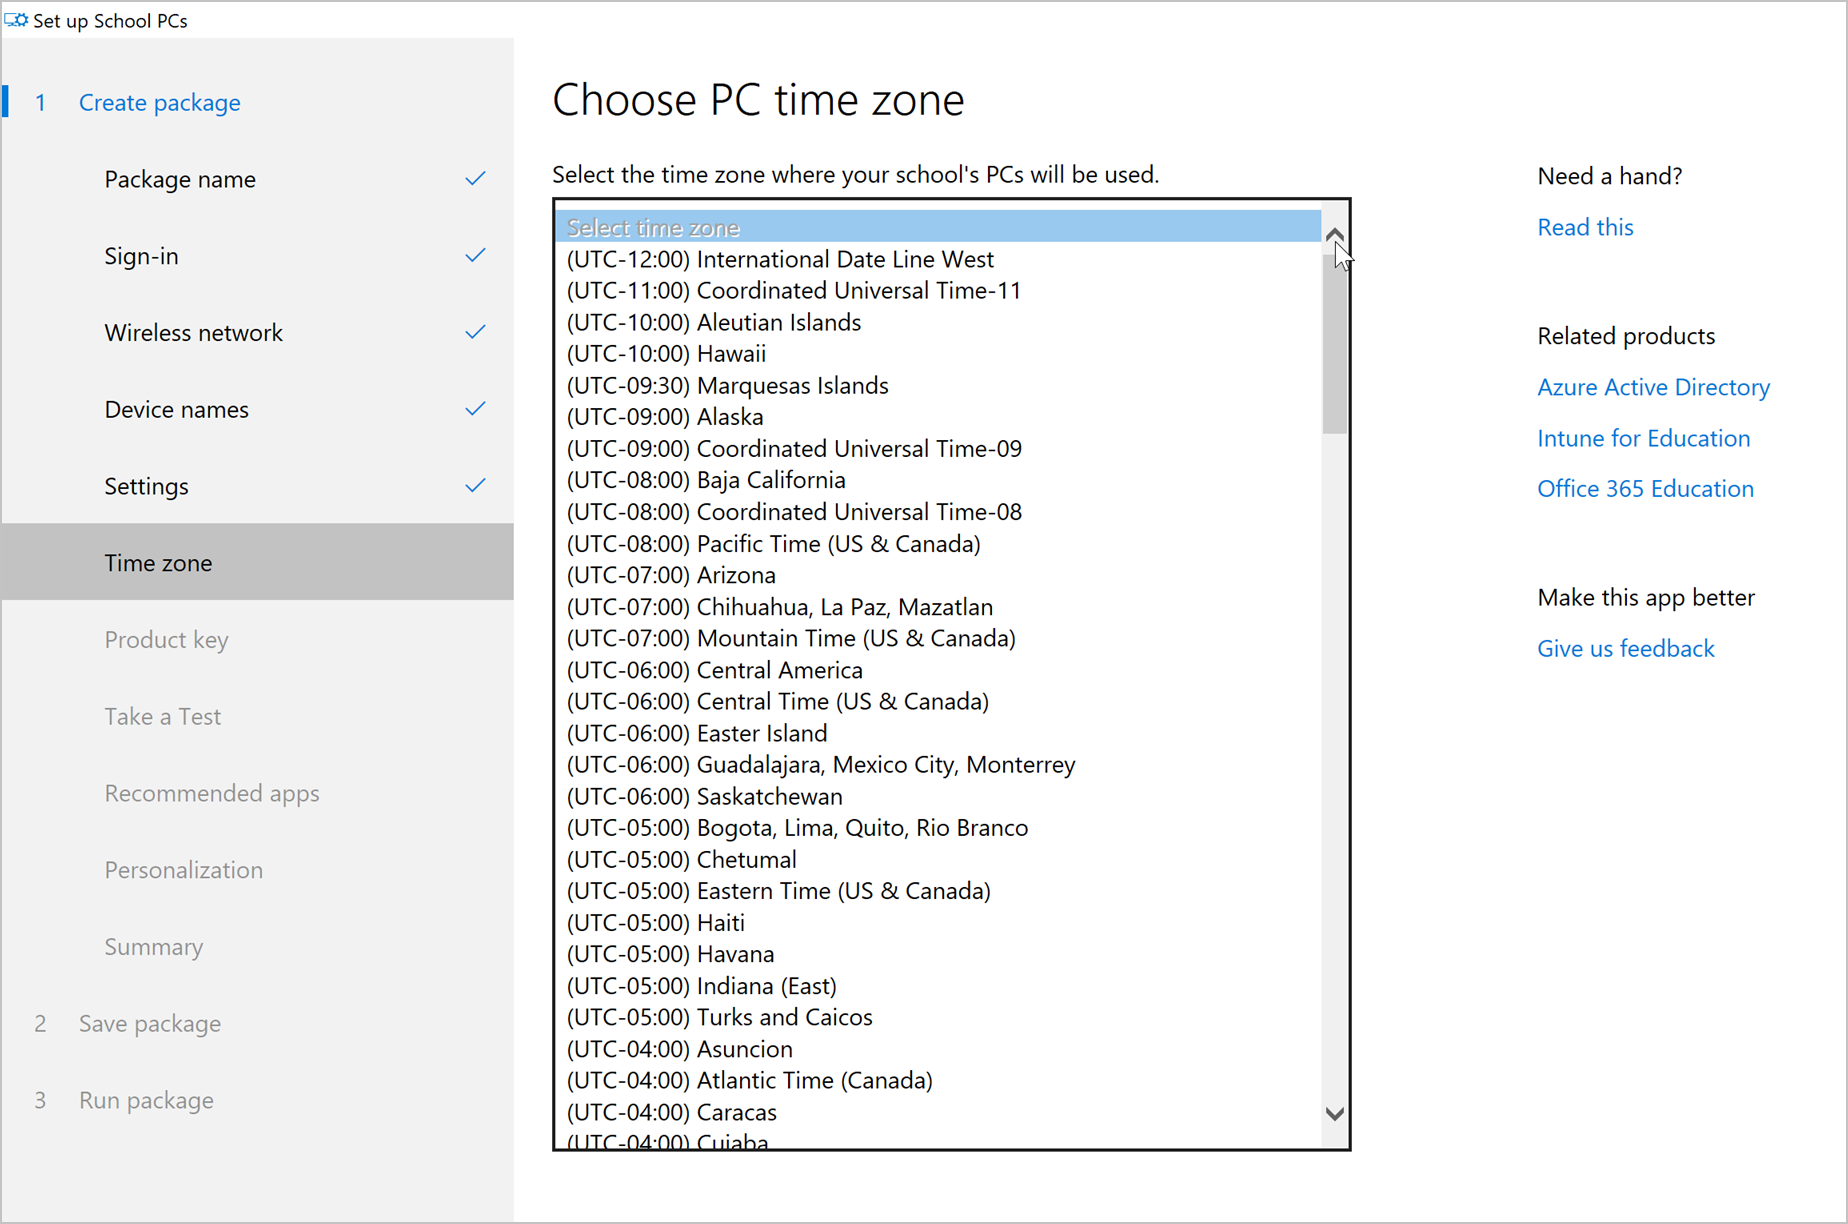 Choose PC time zone page with the time zone menu expanded to show all time zone selections.